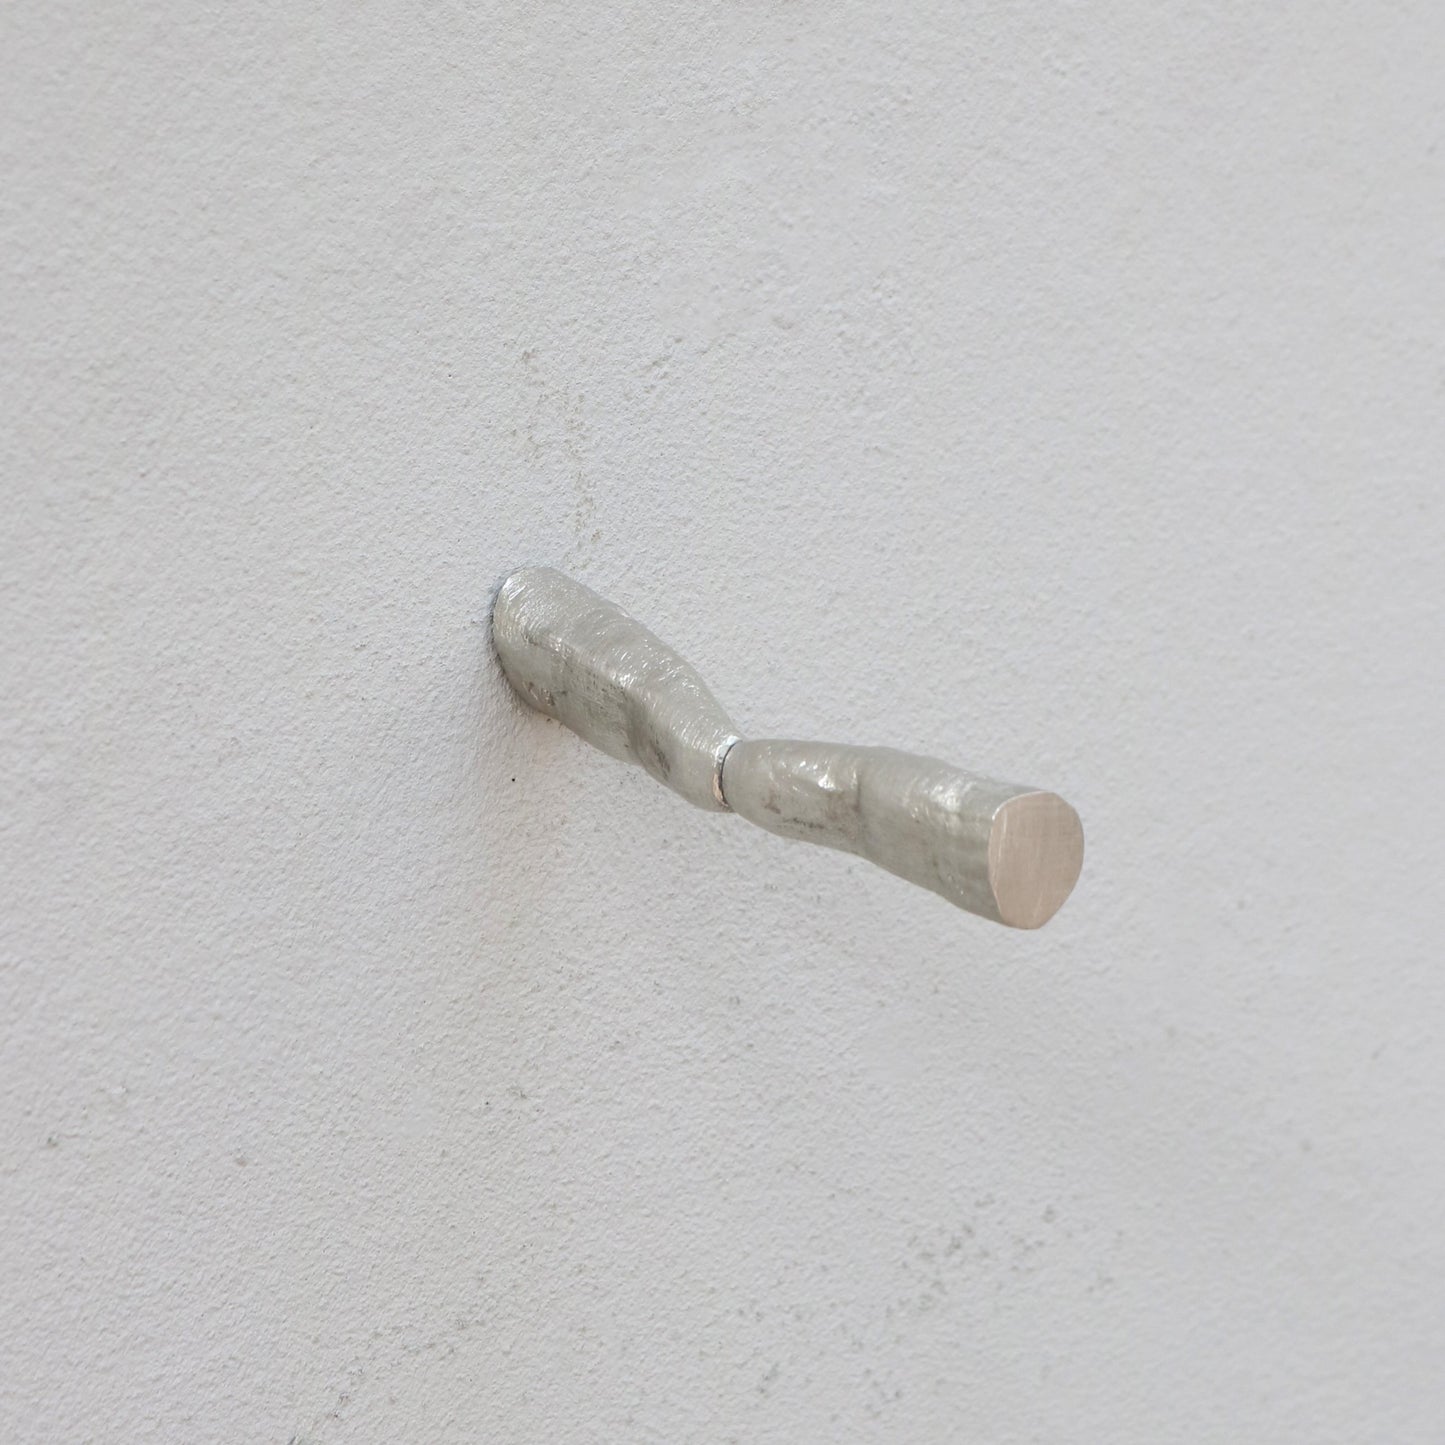 "Finger out of wall" by Kaare Golles